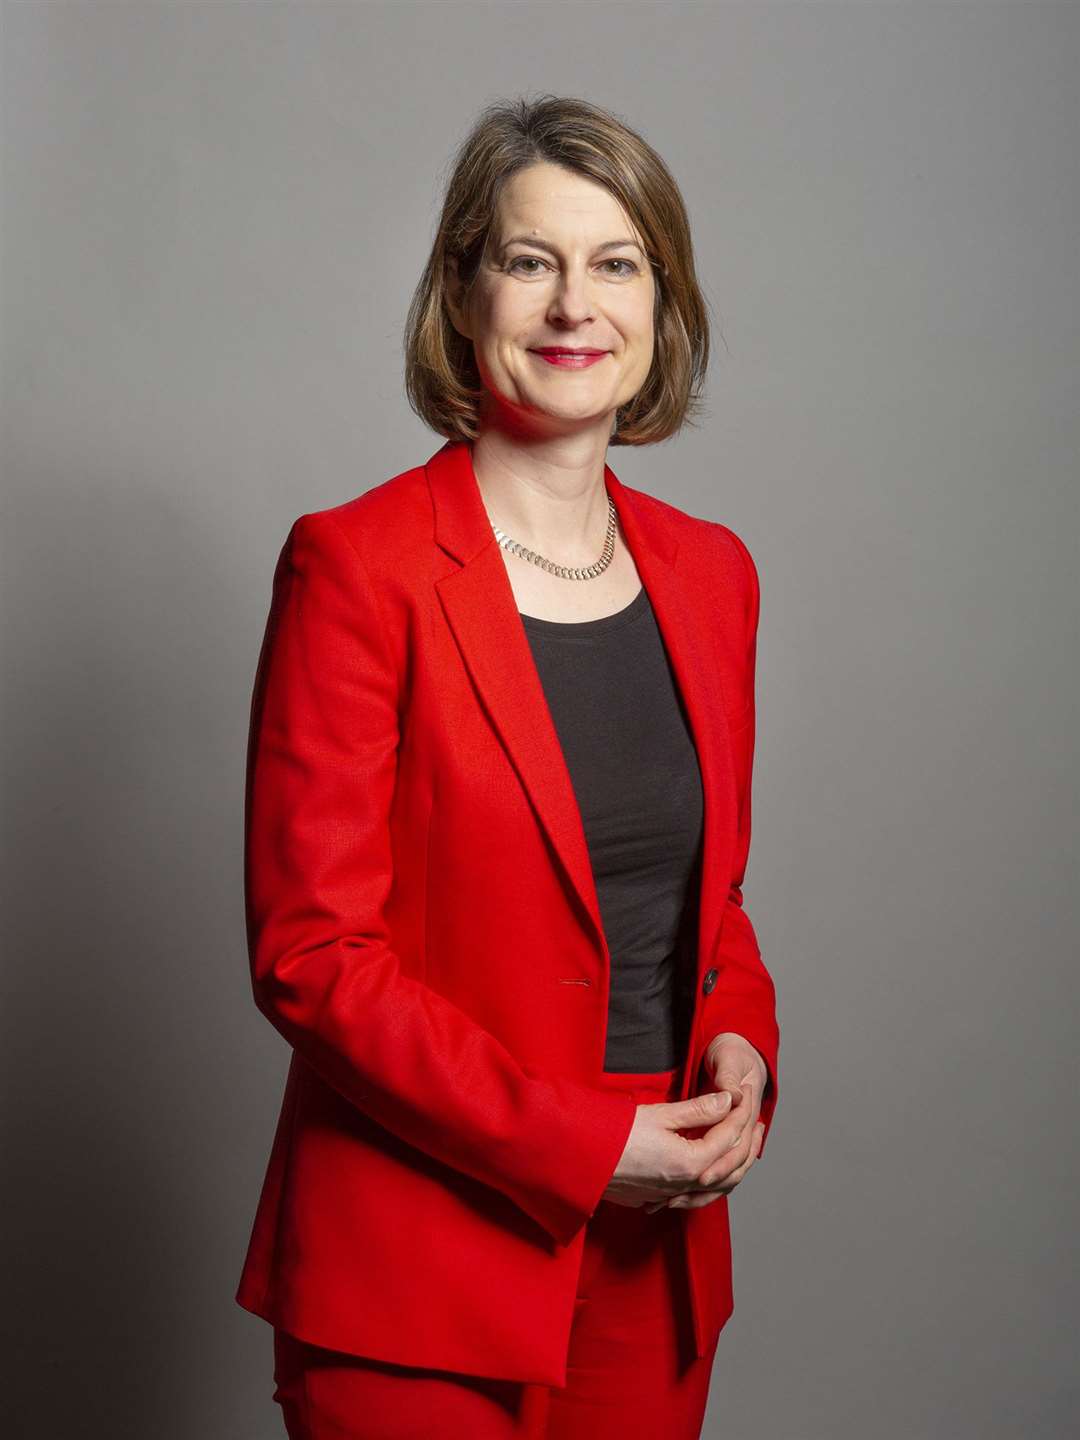 Labour MP Helen Hayes said knife crime has had an ‘absolutely devastating impact’ on families and communities in her constituency of Dulwich and West Norwood (David Woolfall/UK Parliament/PA)